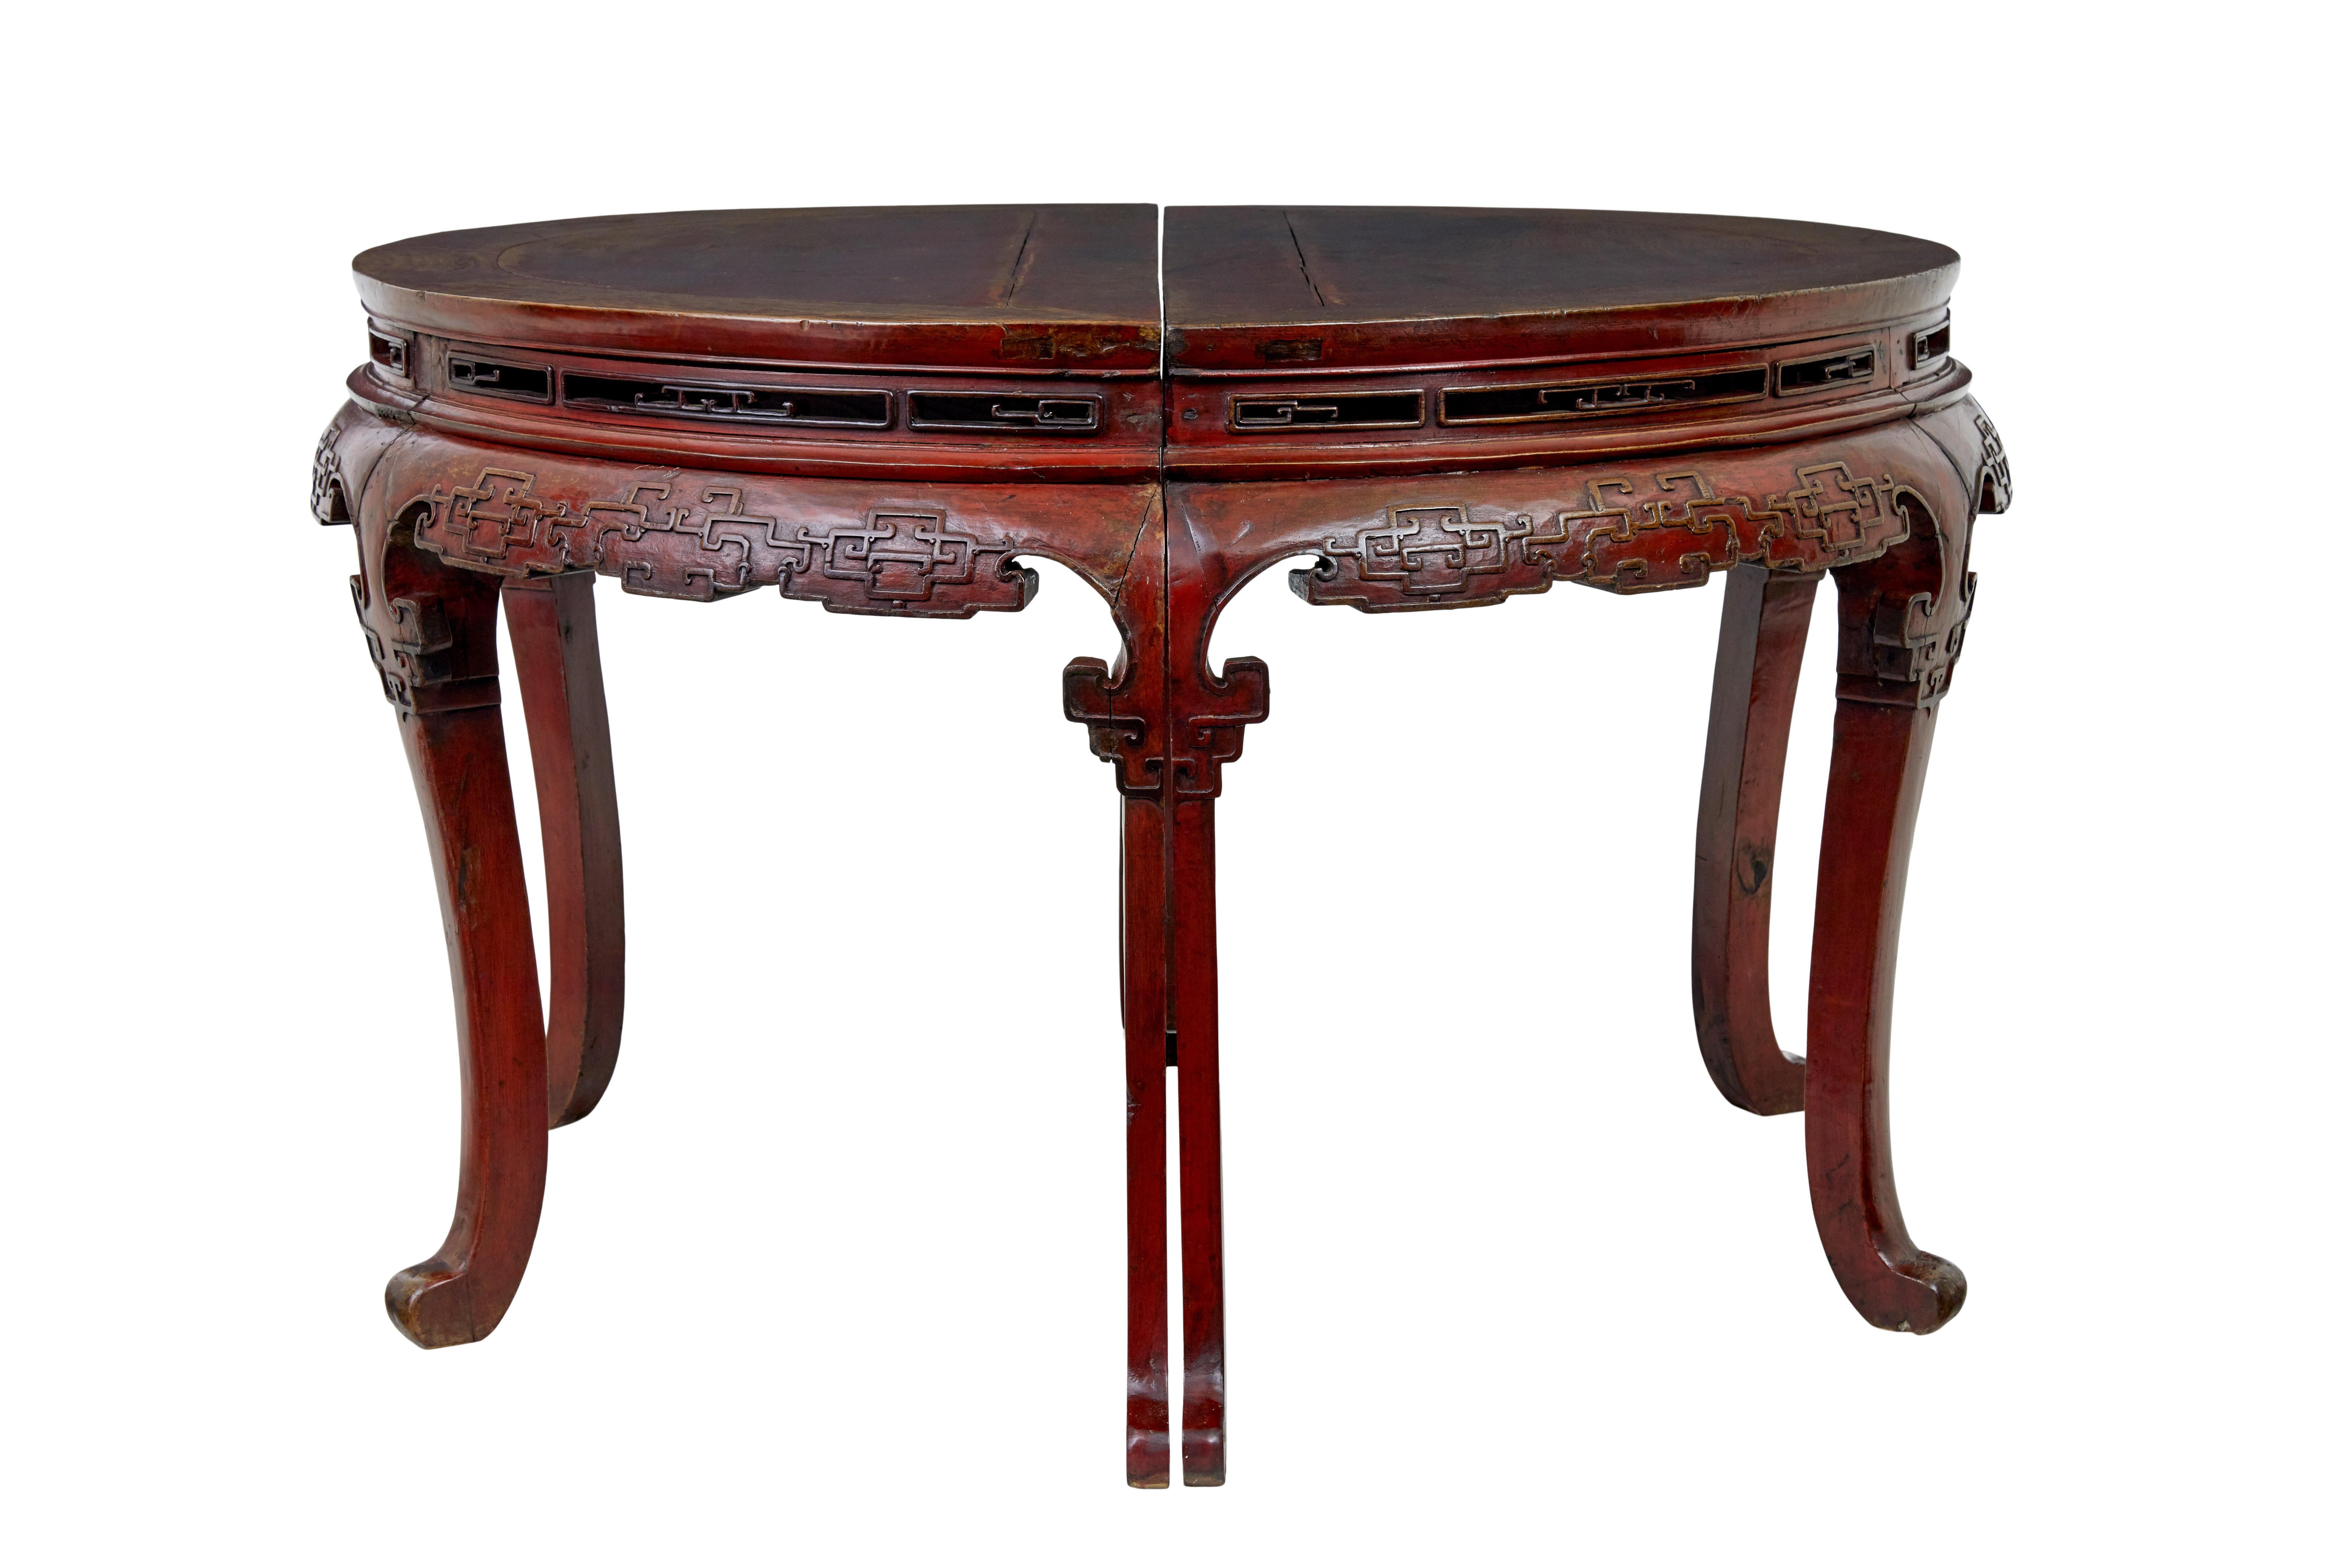 Pair of 19th century red lacquer Chinese demi lune tables circa 1880.

These tables work as a pair of demi lune tables and stand back to back, slotting together to form a center table or even a dining table.

Pierced apertures below the table top,